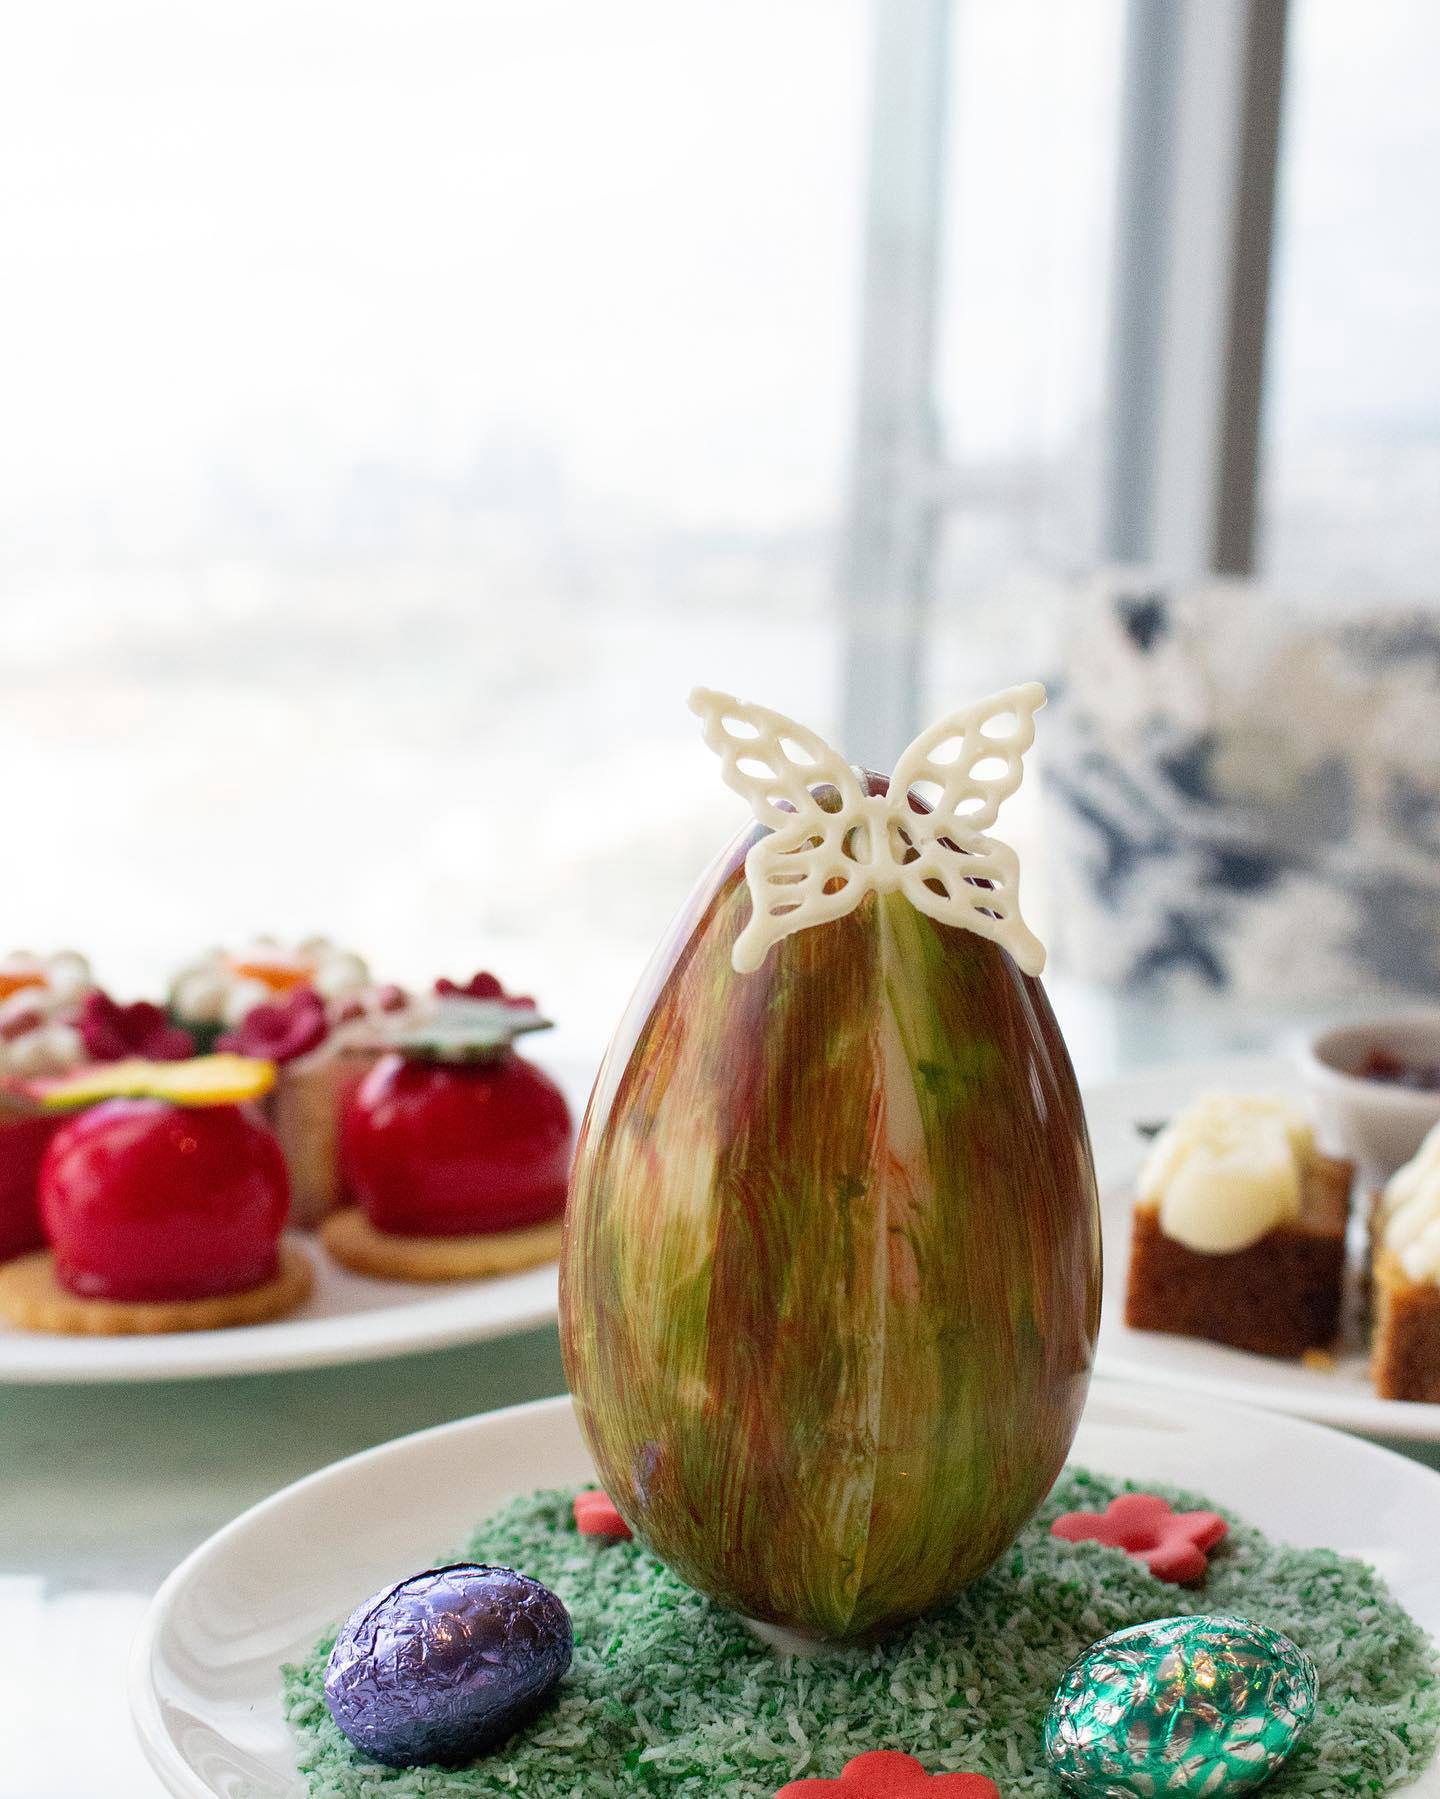 Happy Easter from Shangri-La The Shard, London